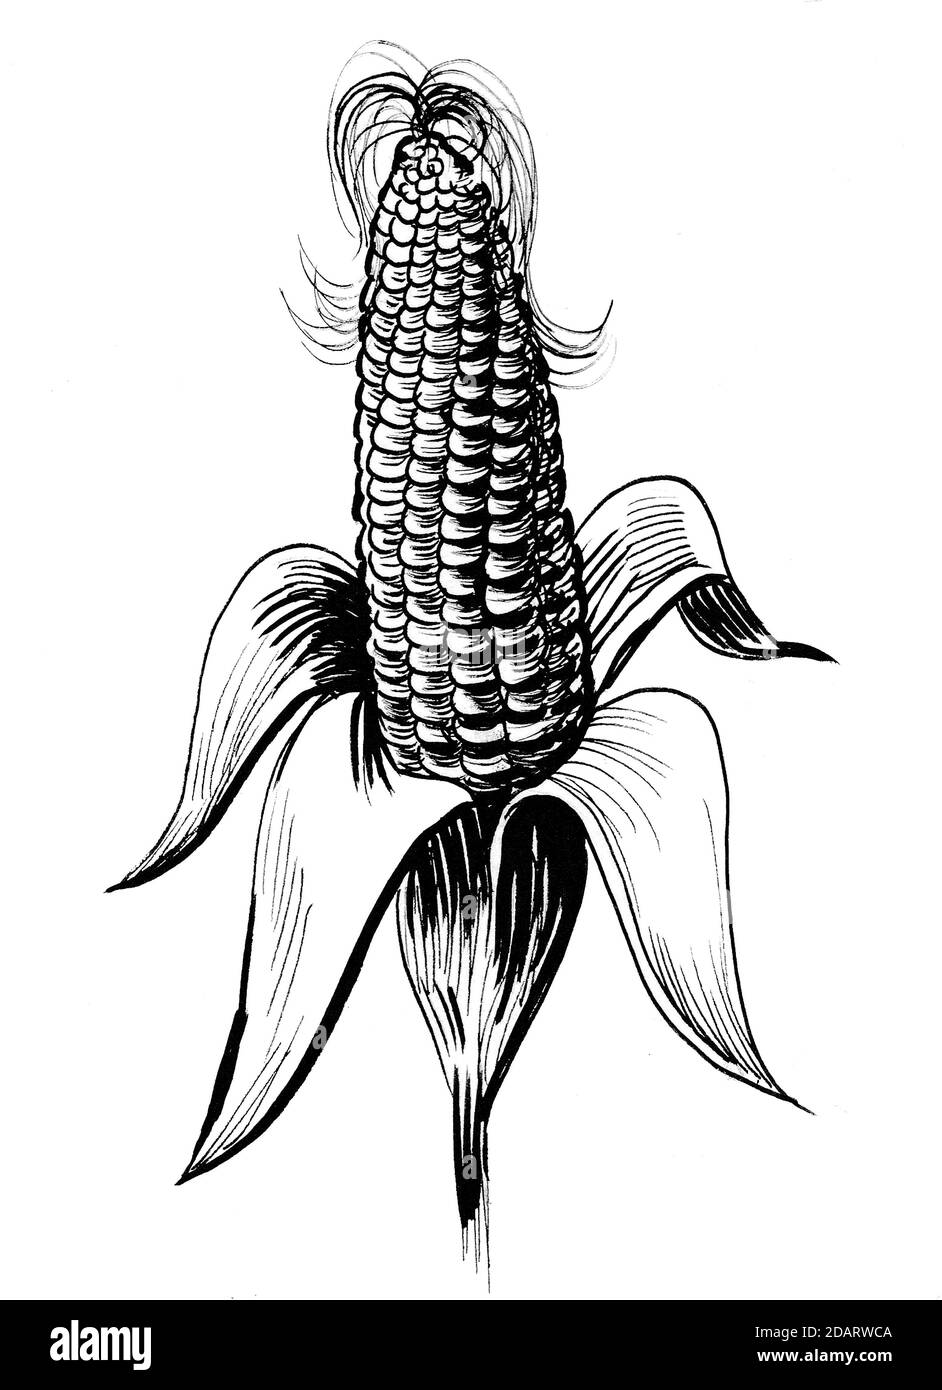 Corn plant crop. Ink black and white drawing Stock Photo